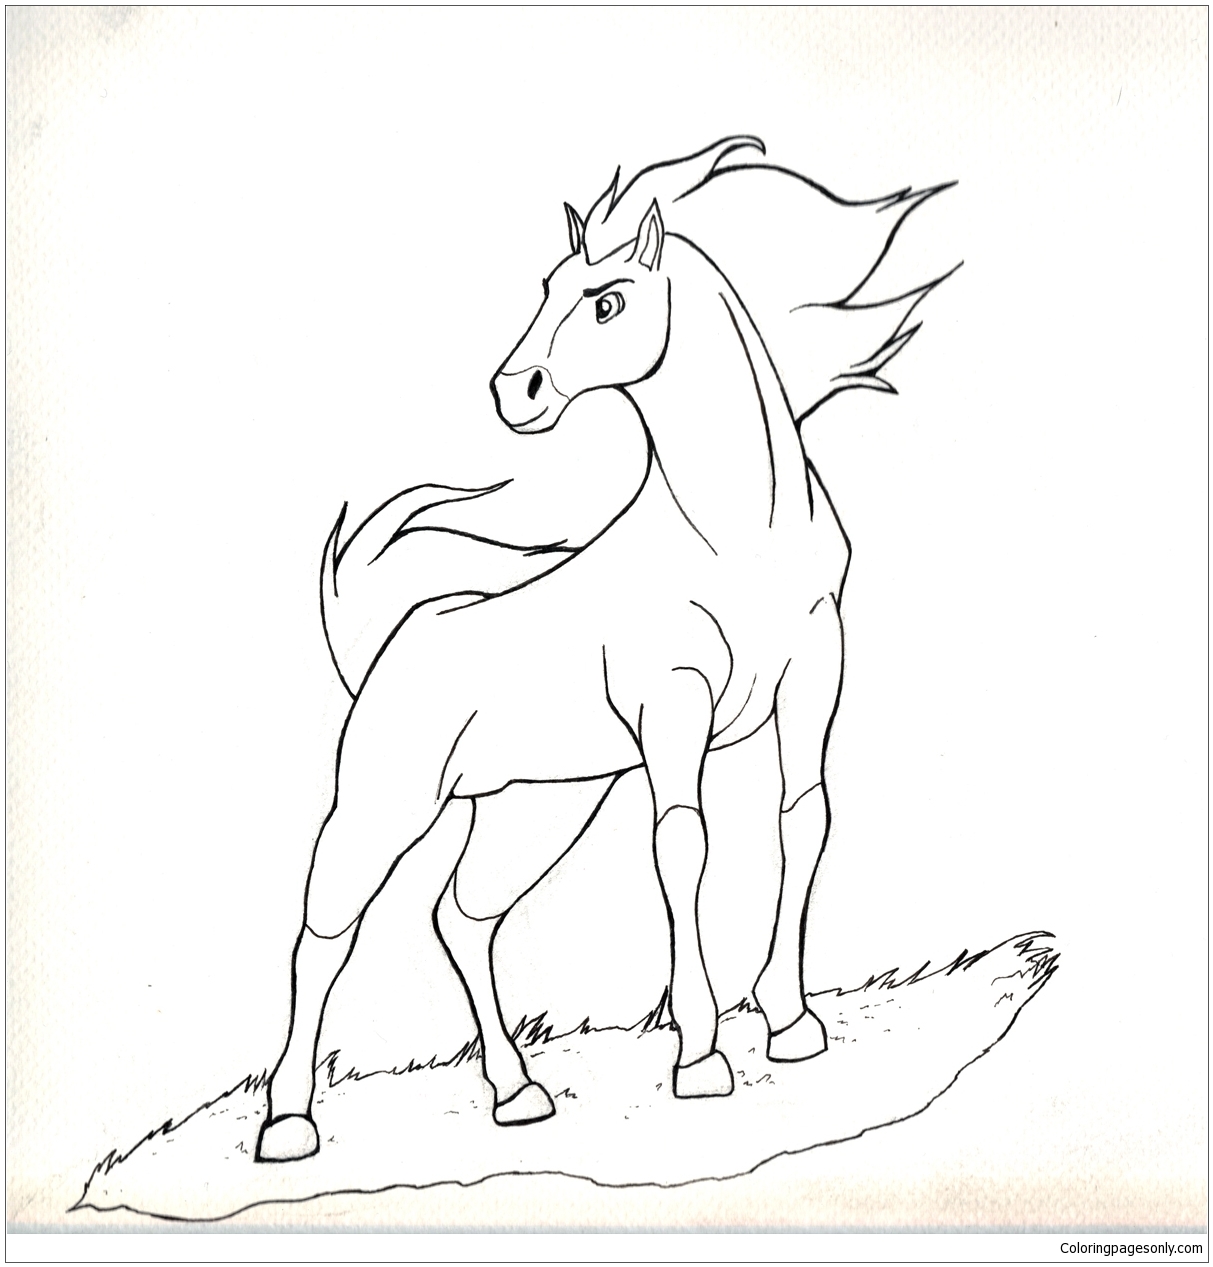 Horse Spirit 1 Coloring Page